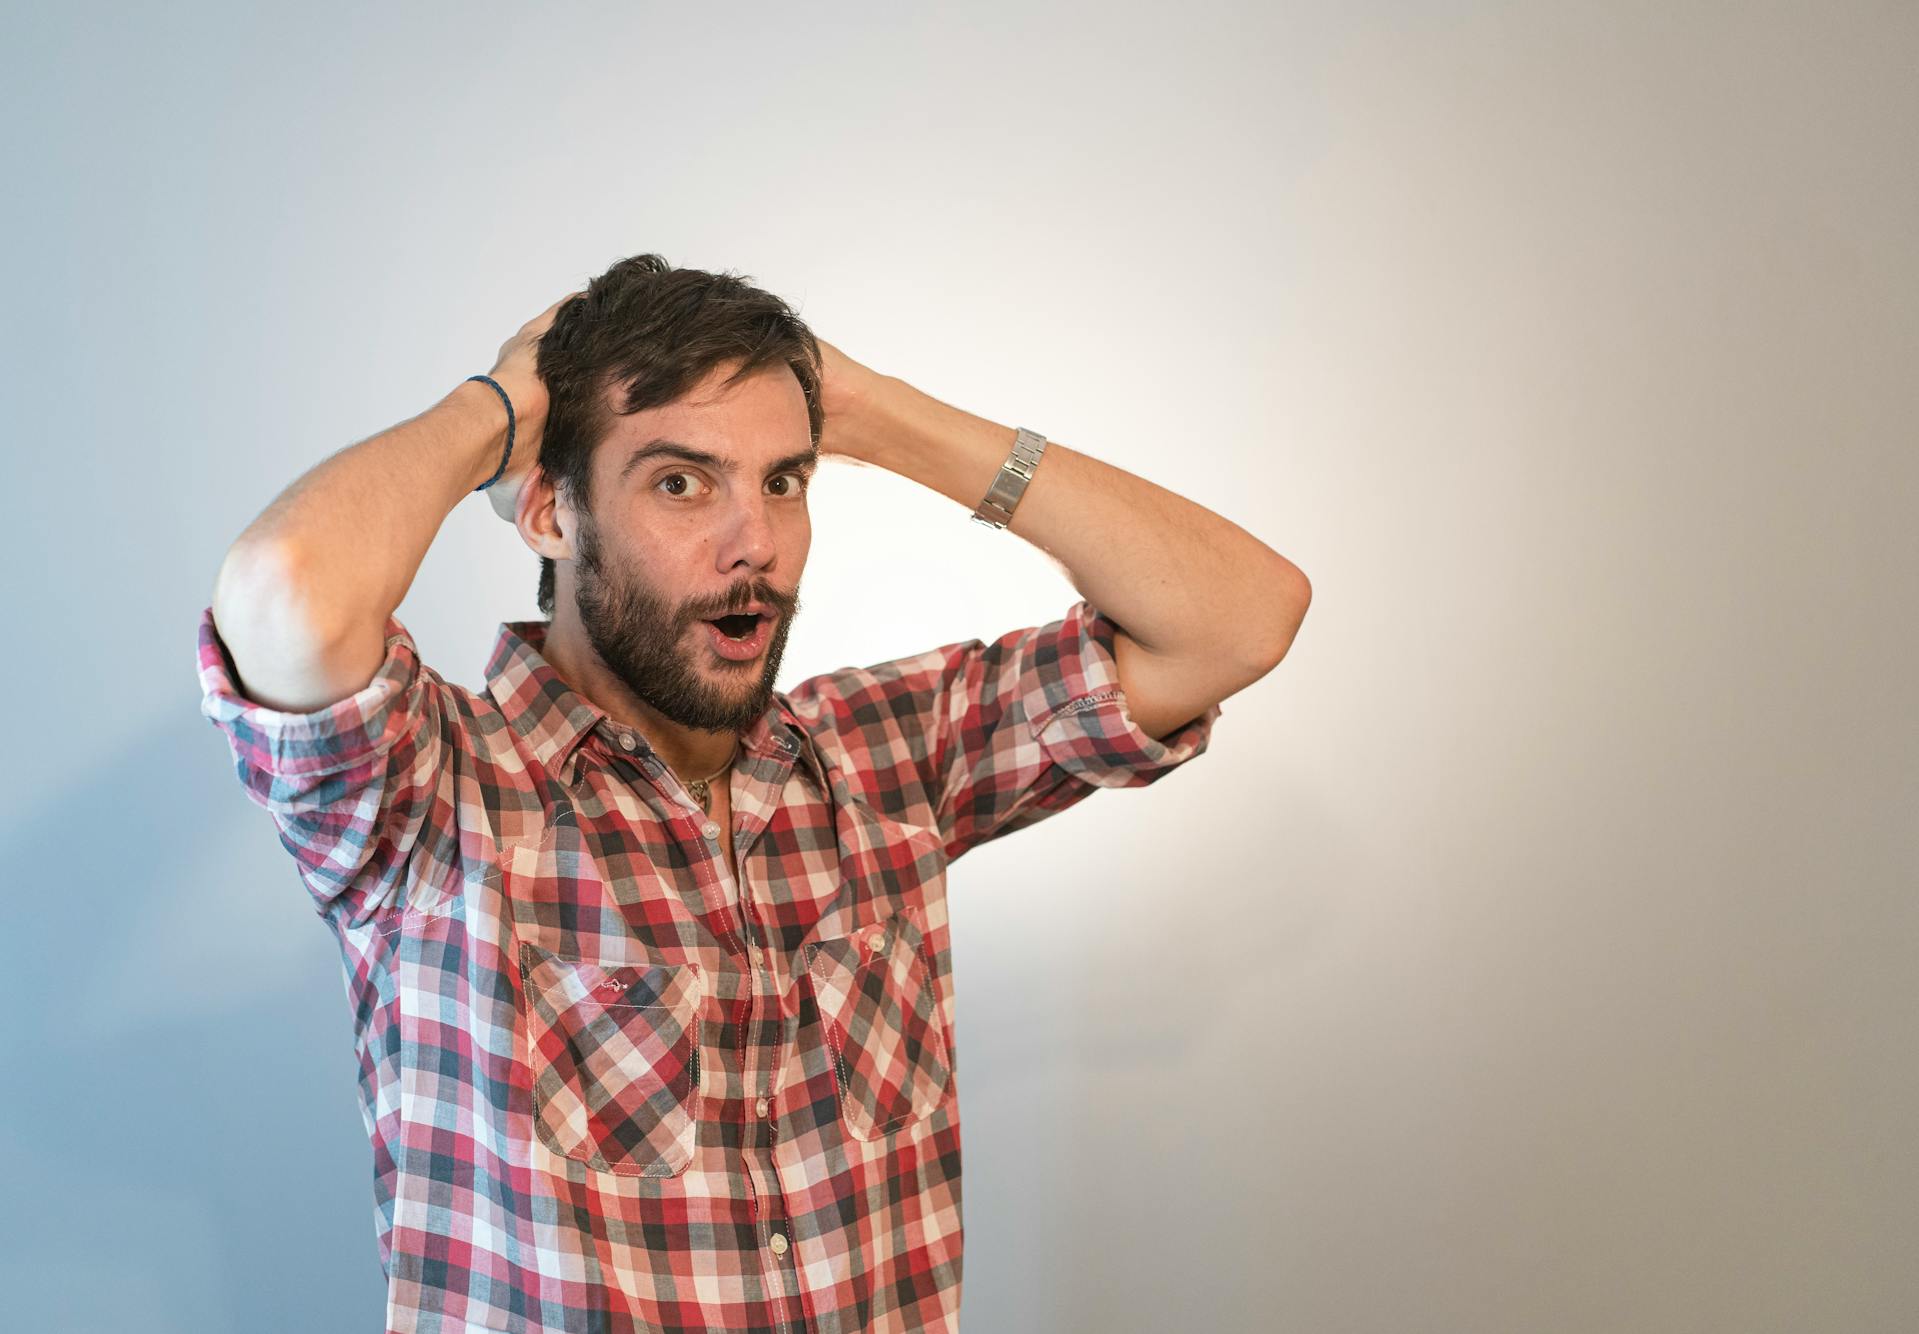 A shocked man holding his head | Source: Pexels